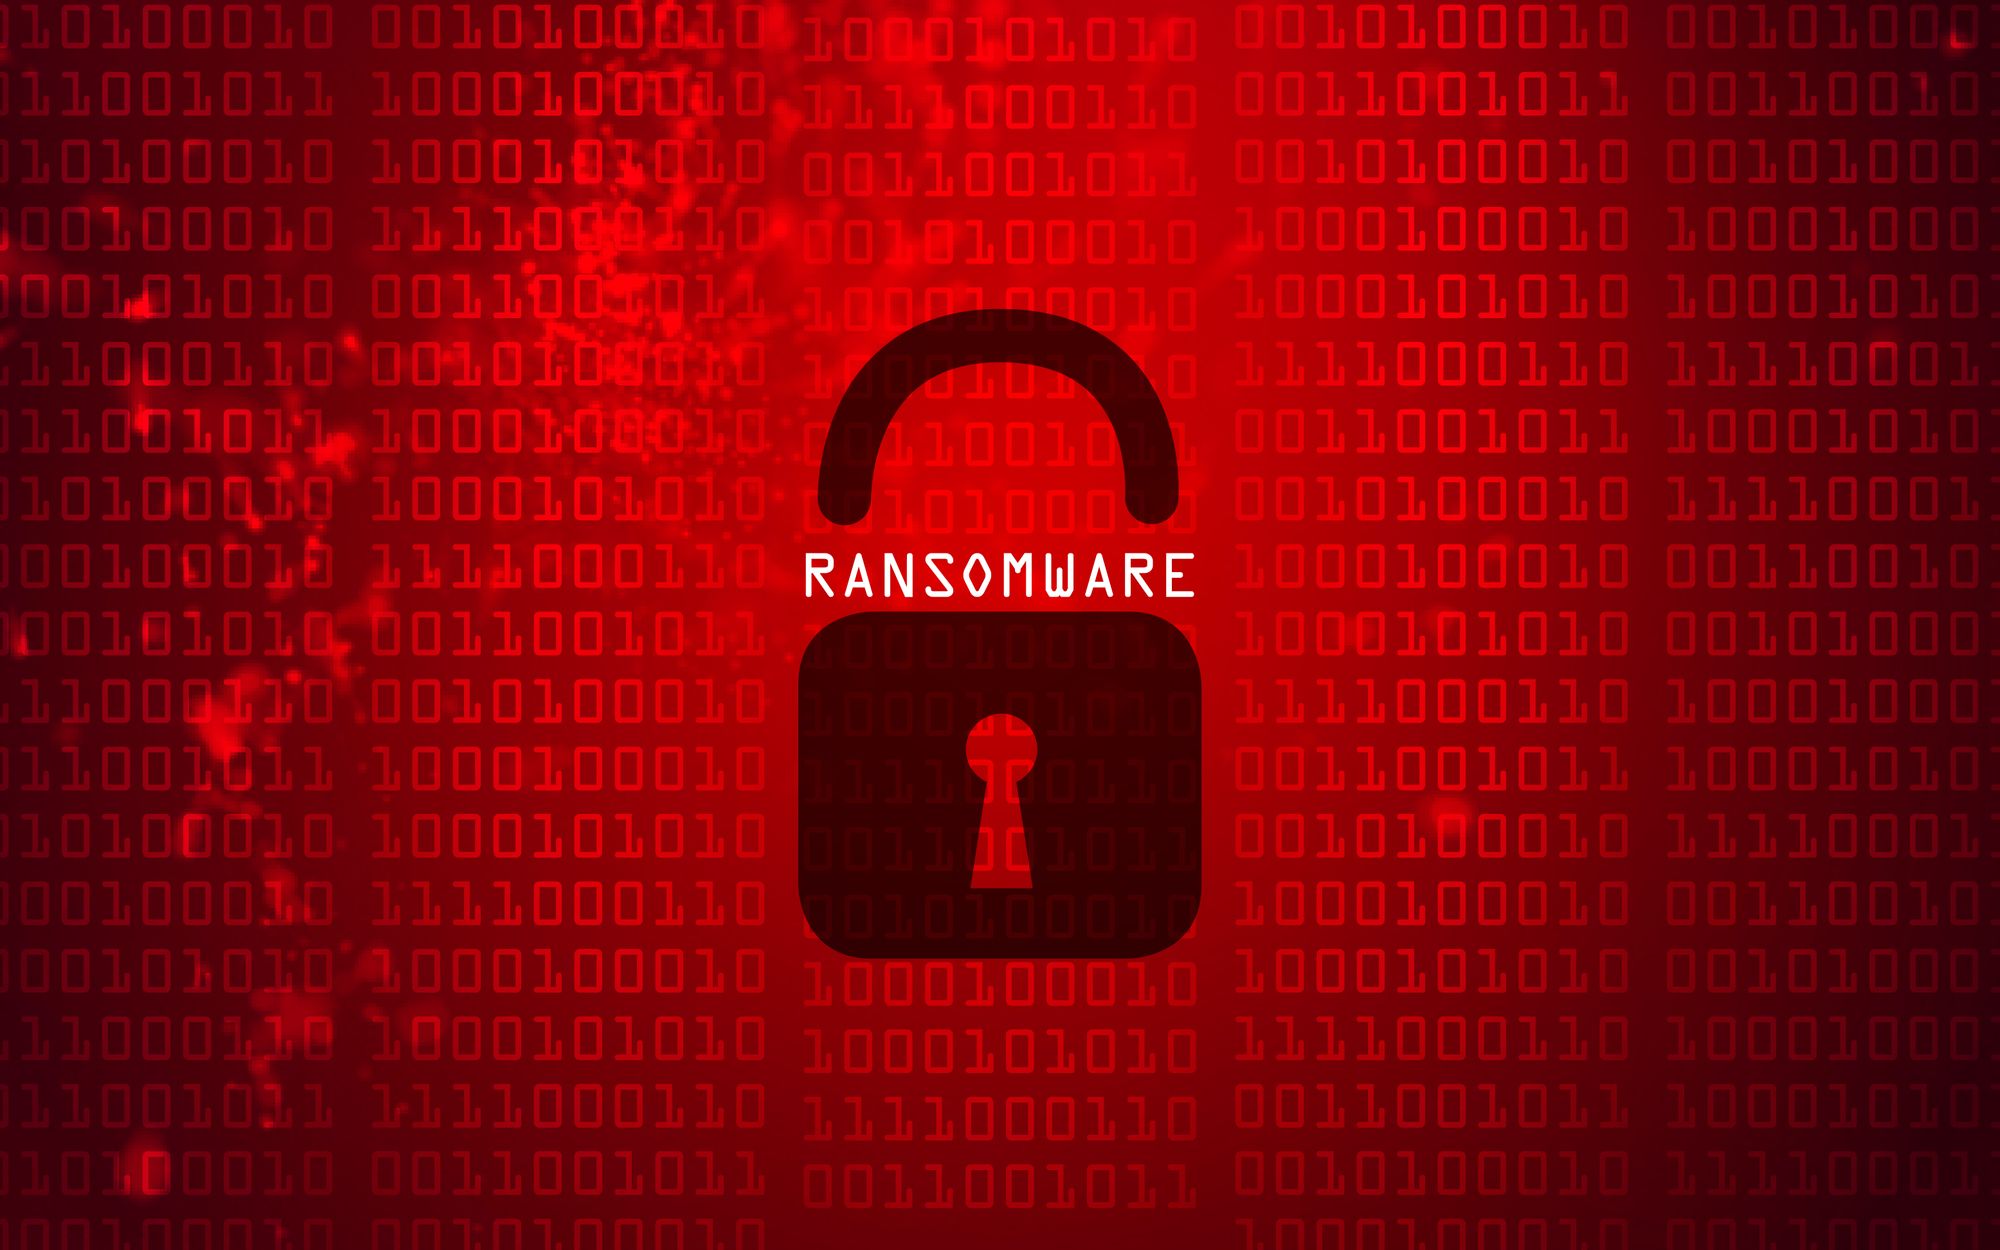 Ransomware Campaign Compromising VMware ESXi Servers